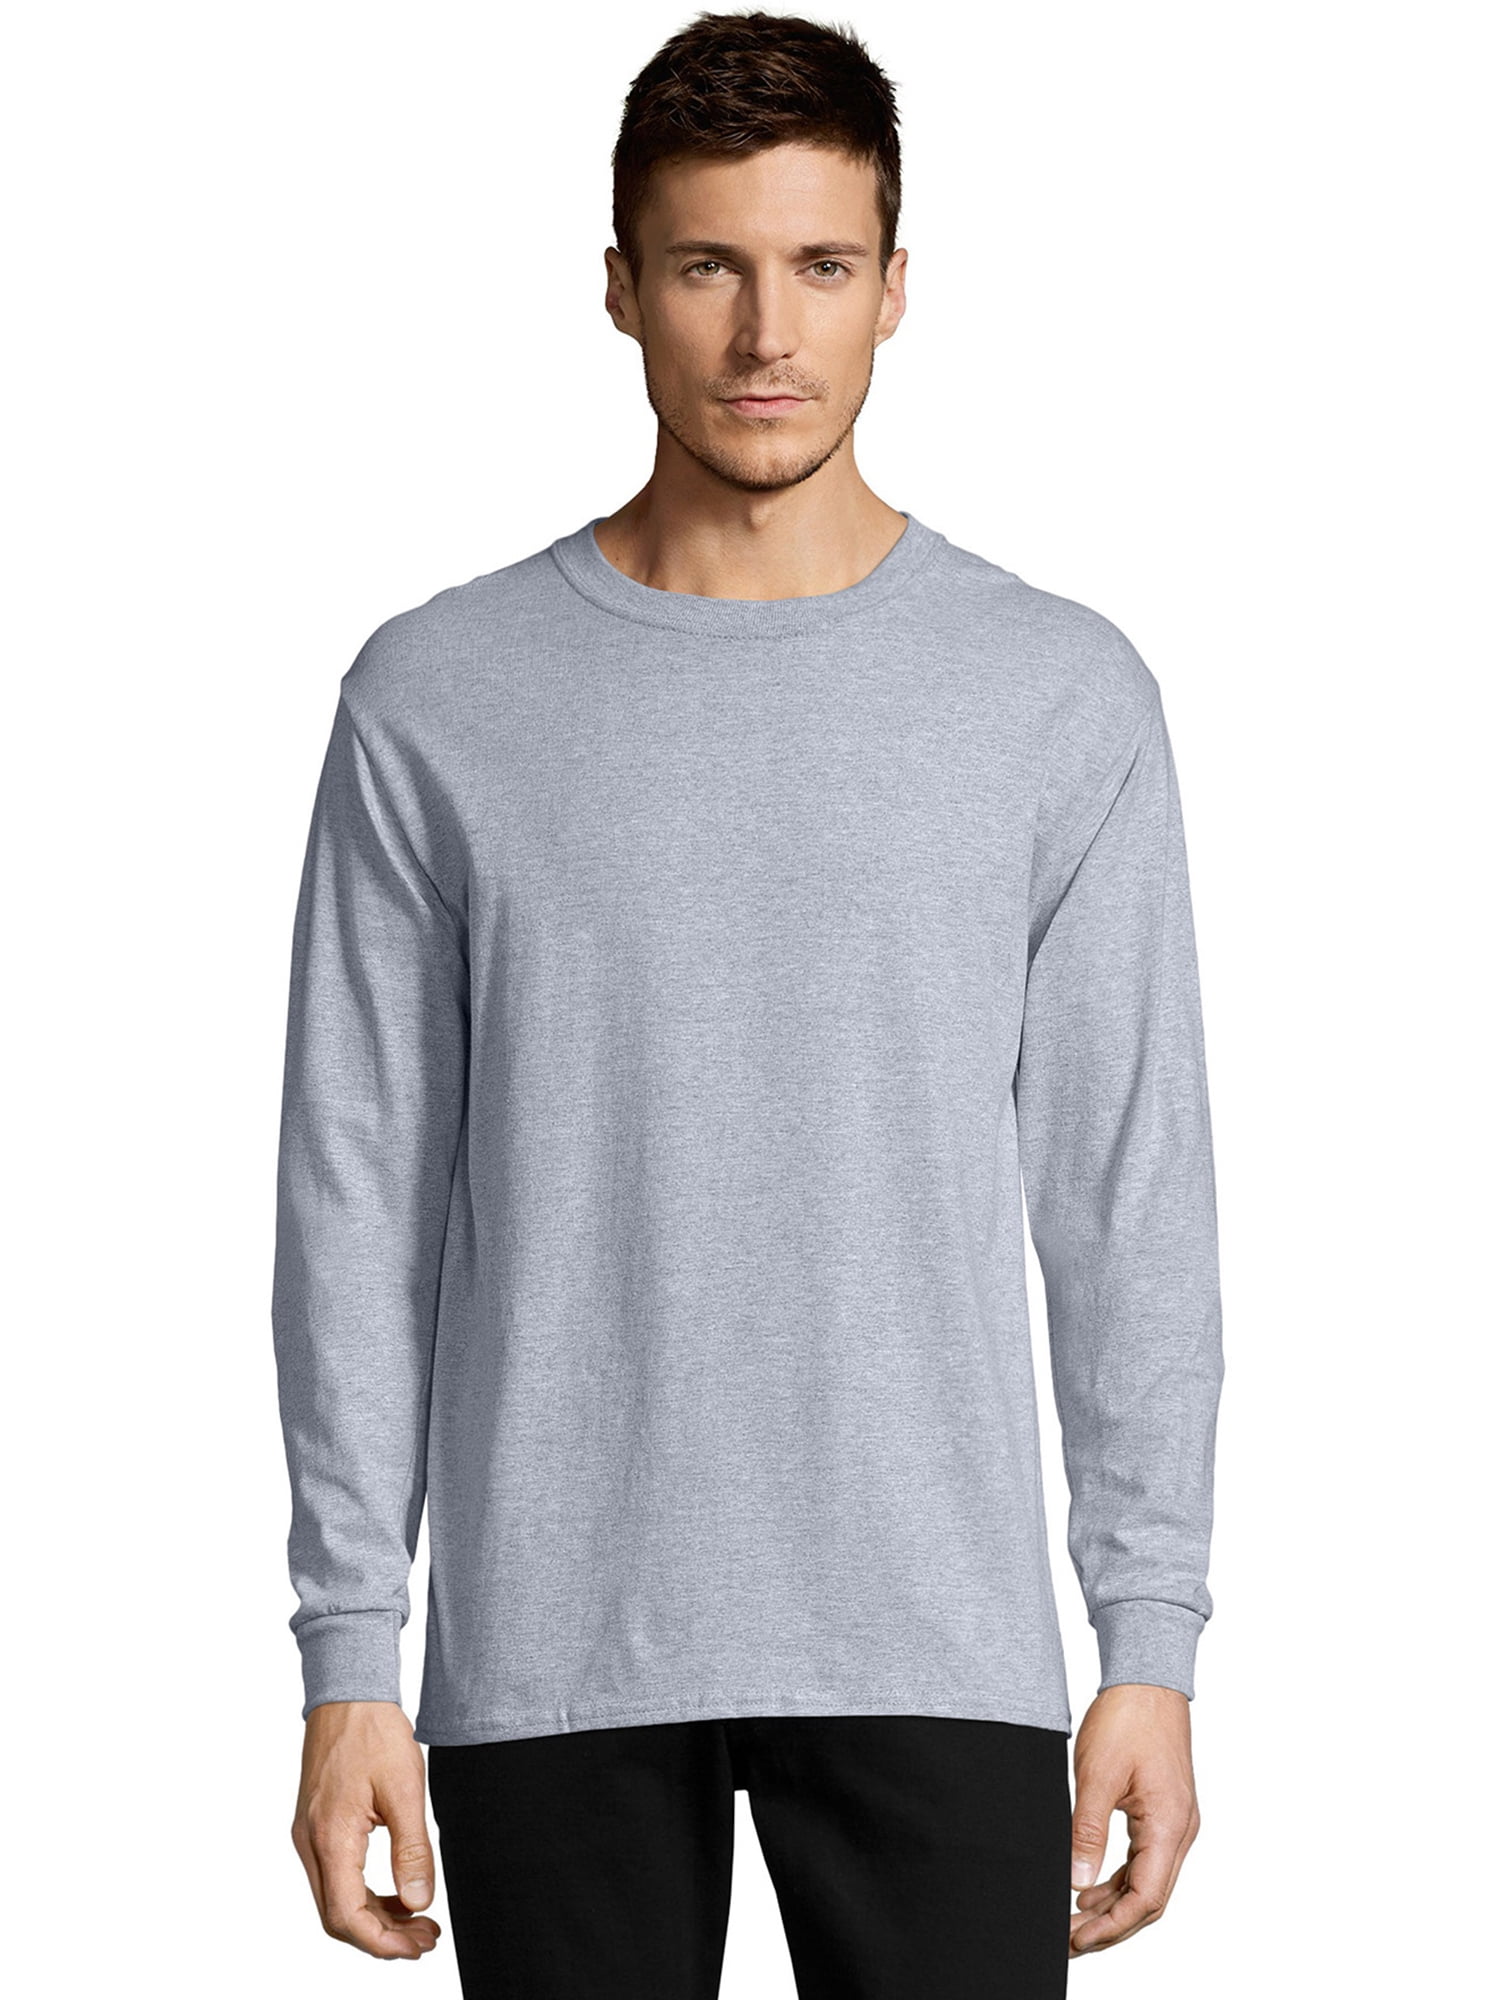 Hanes Essentials Men’s Cotton Long Sleeve T-Shirt, up to sizes 3XL ...